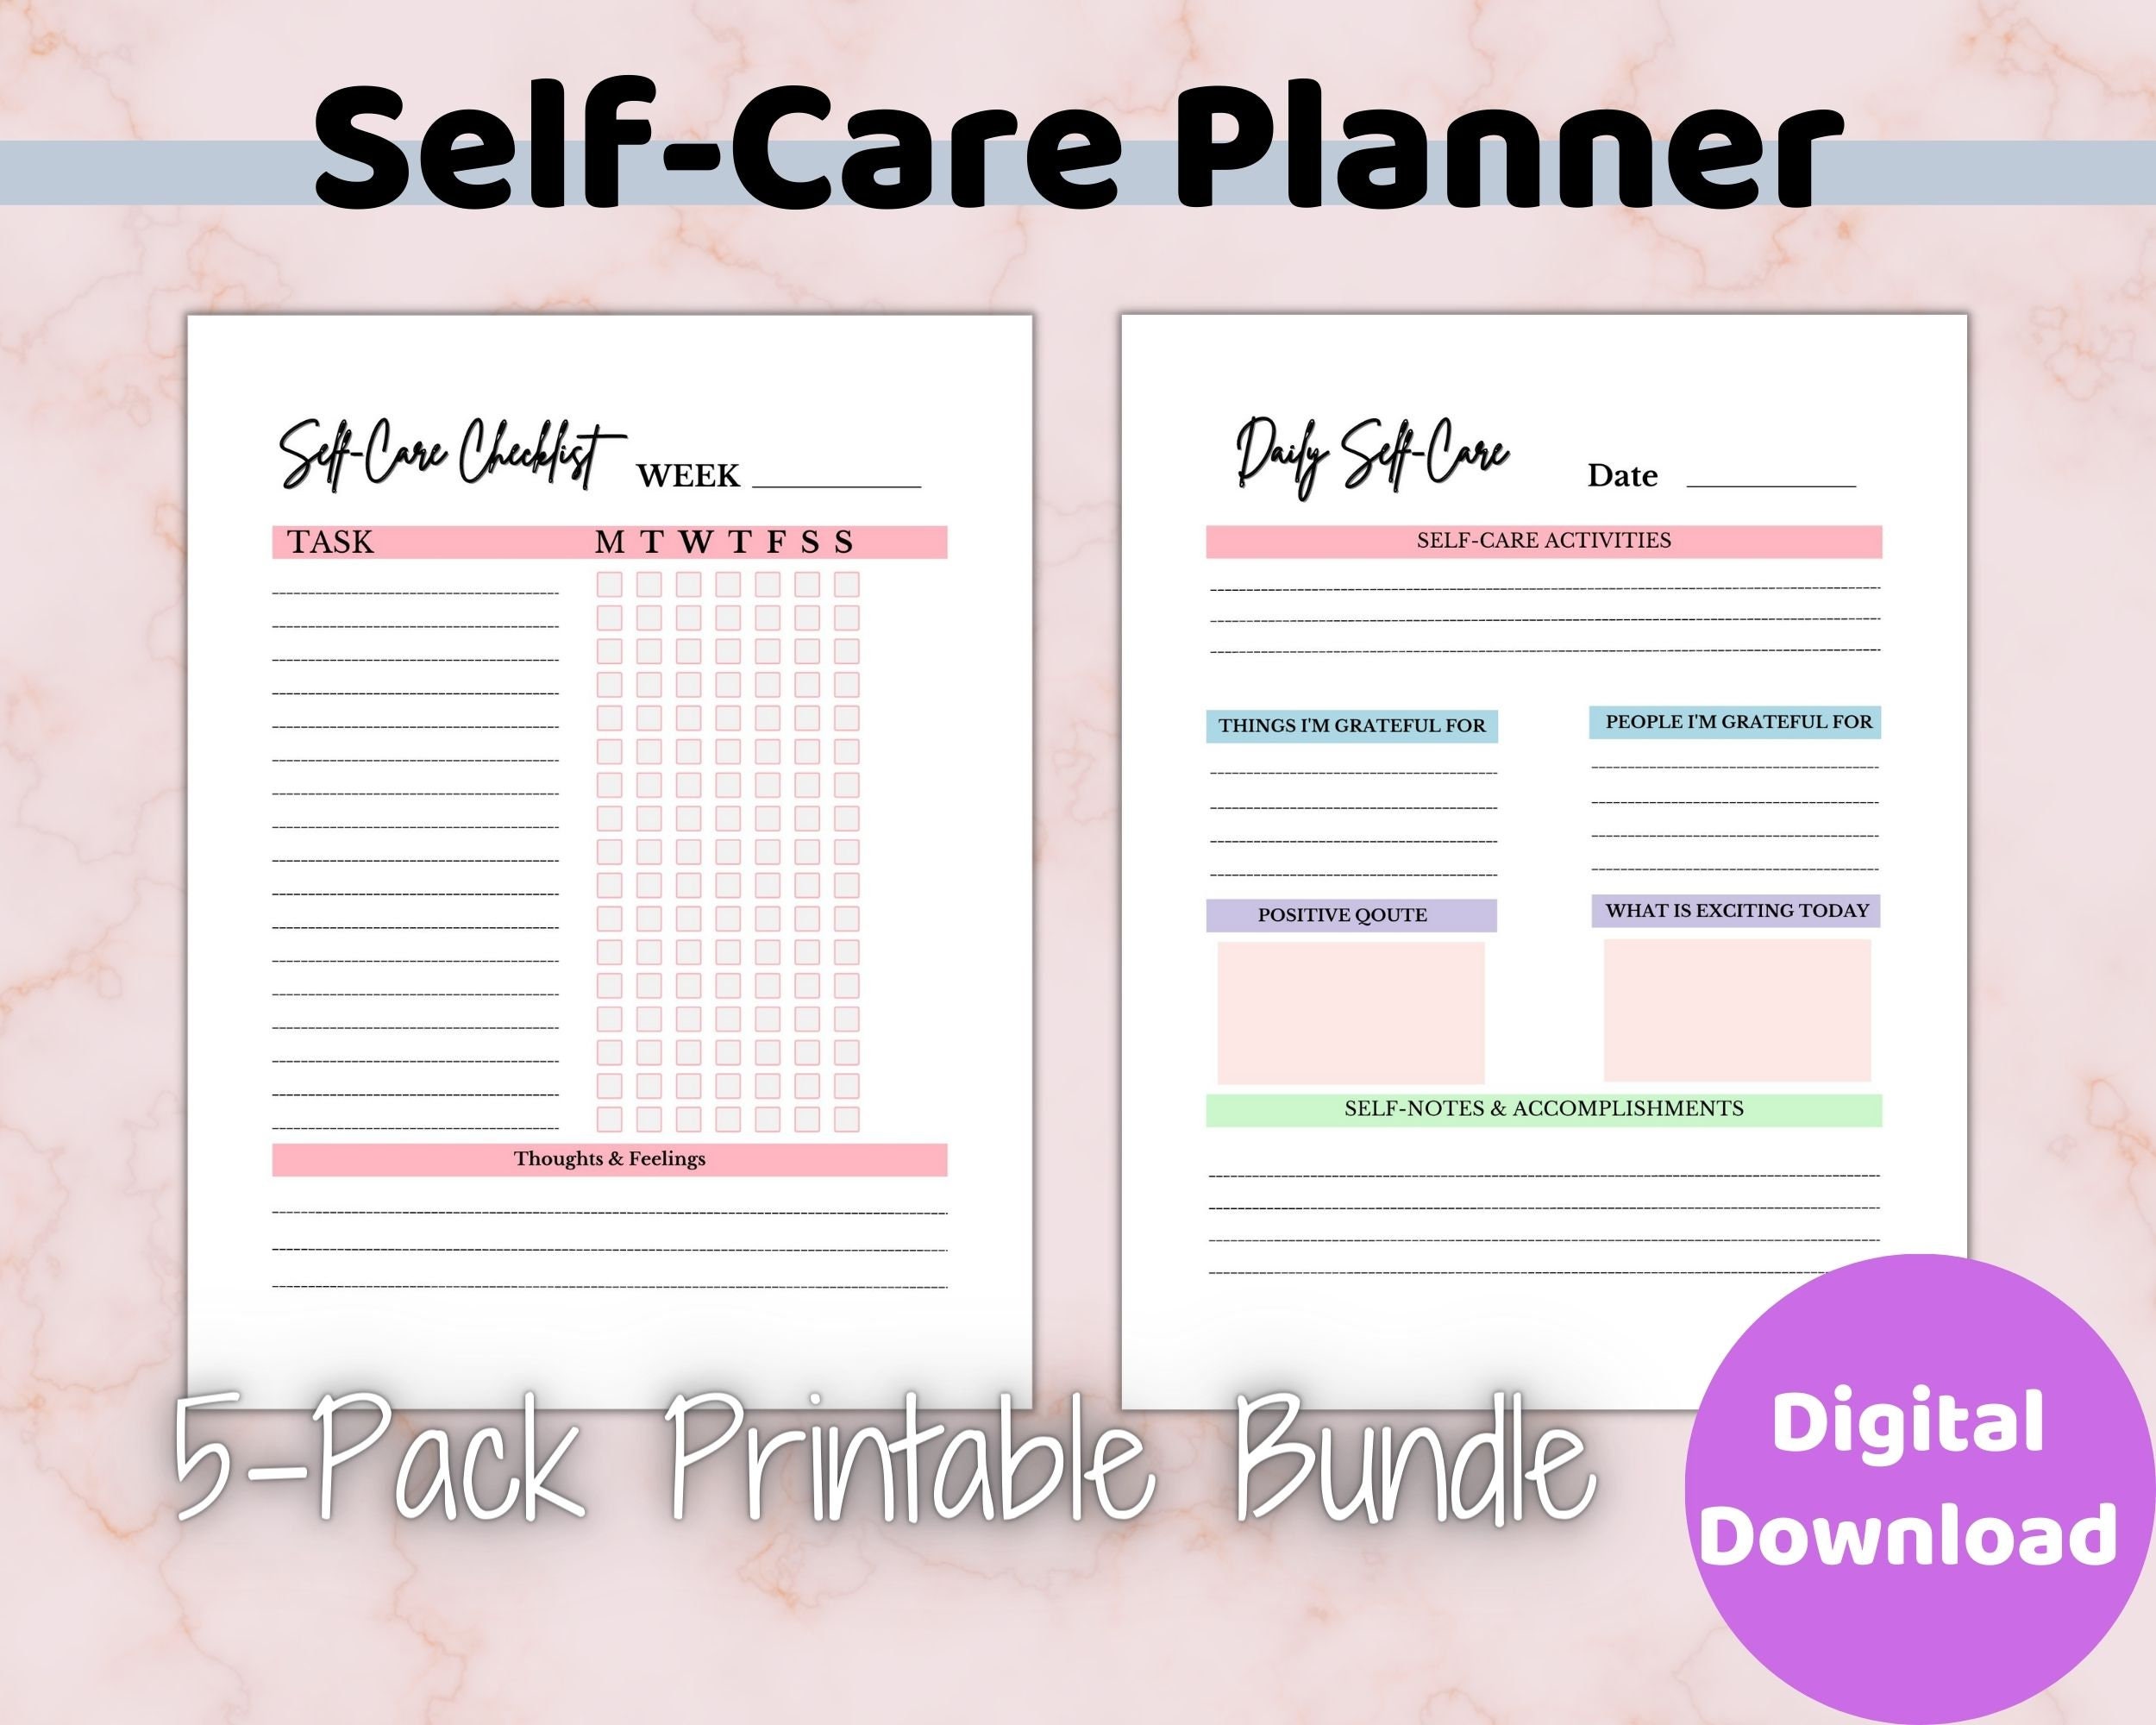 Customize online this Simple Psychology LV Self Care Checklist template